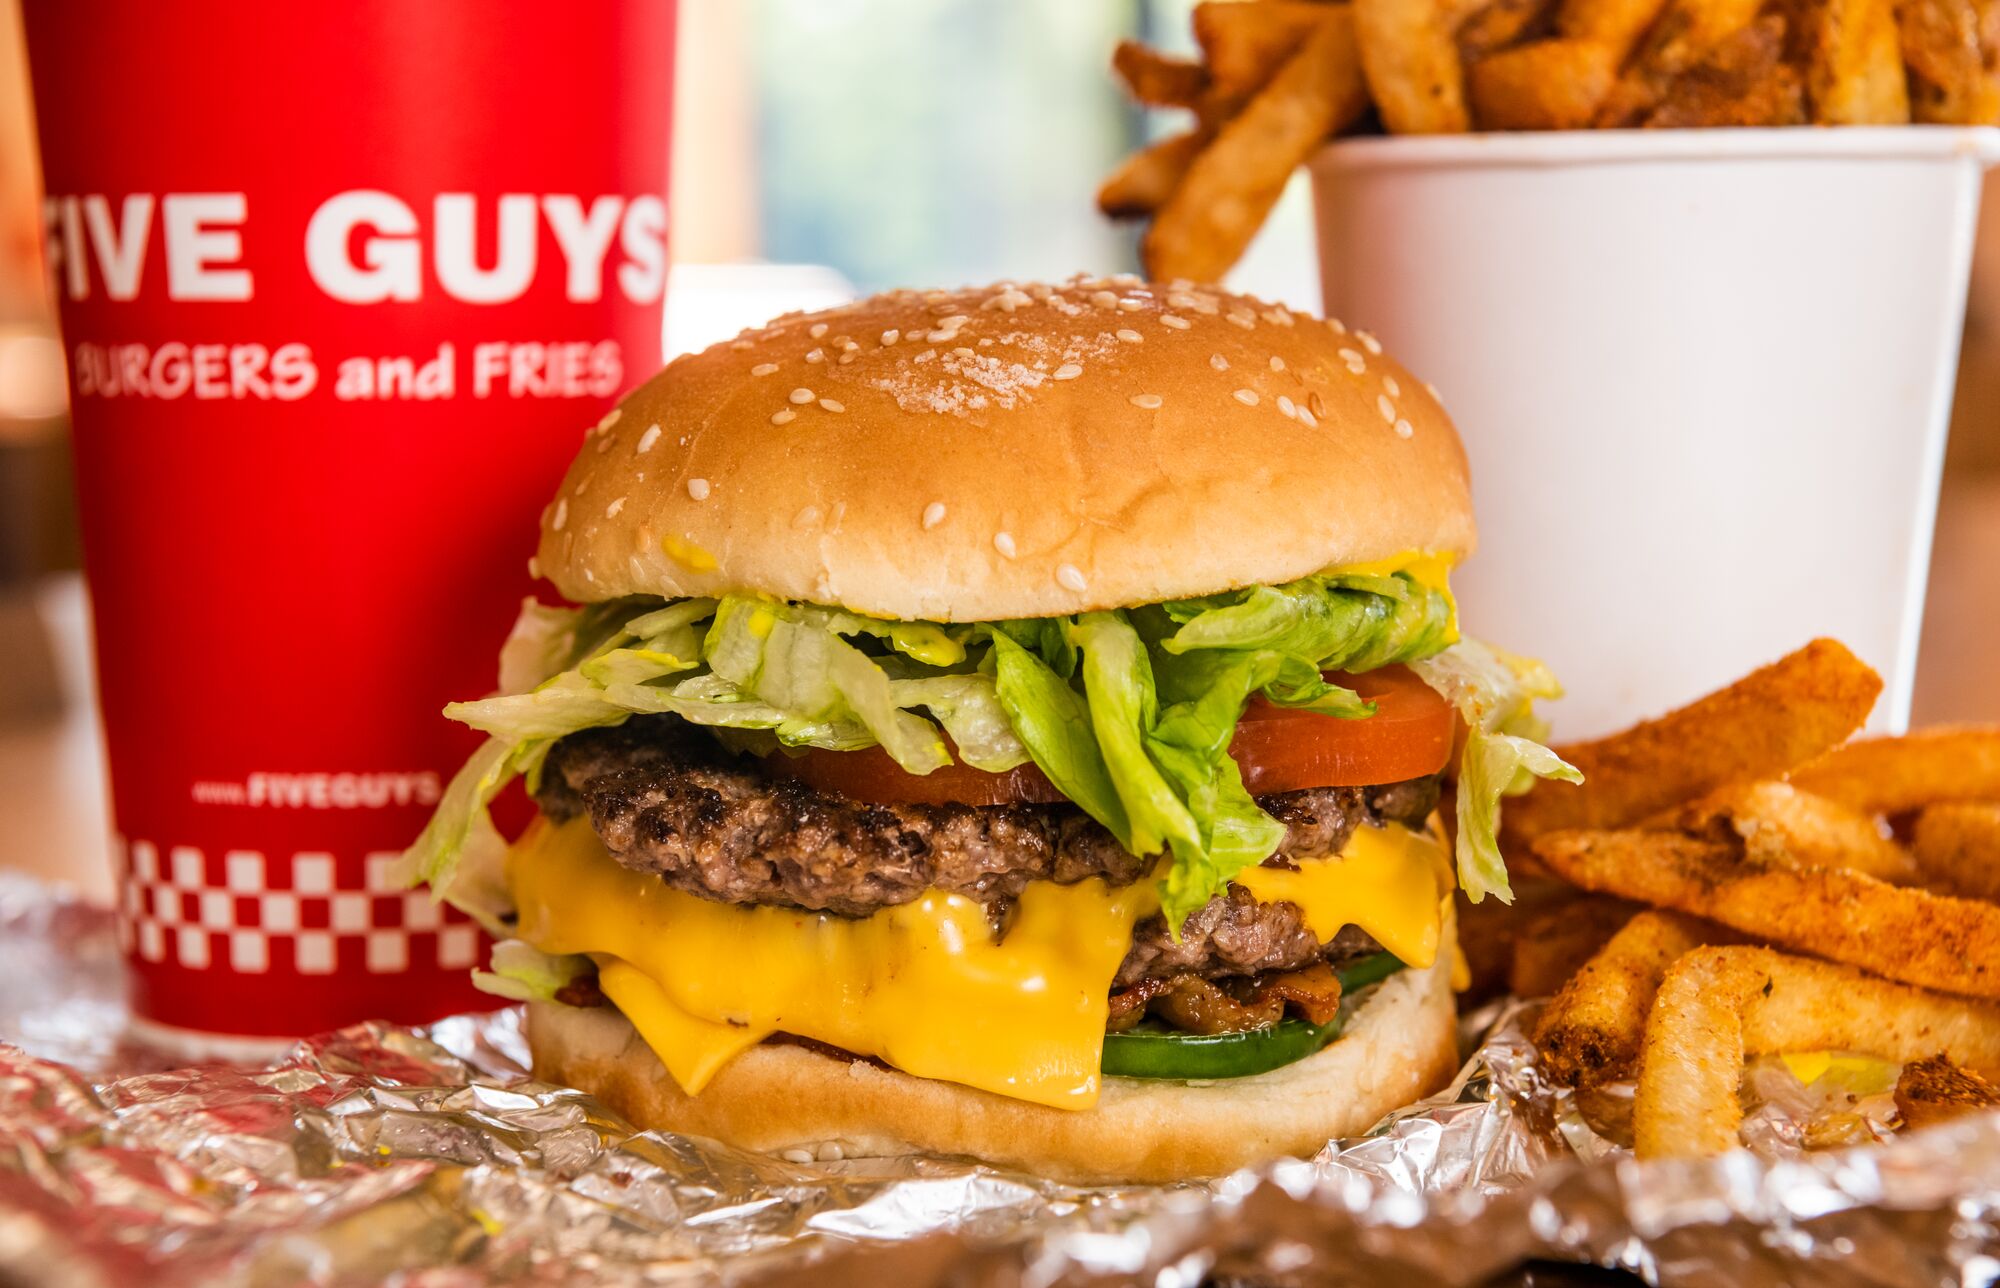 A close-up photograph of a Five Guys cheeseburger, soft drink in red Five Guys cup, and regular orde Five Guys Ottawa (613)562-8119